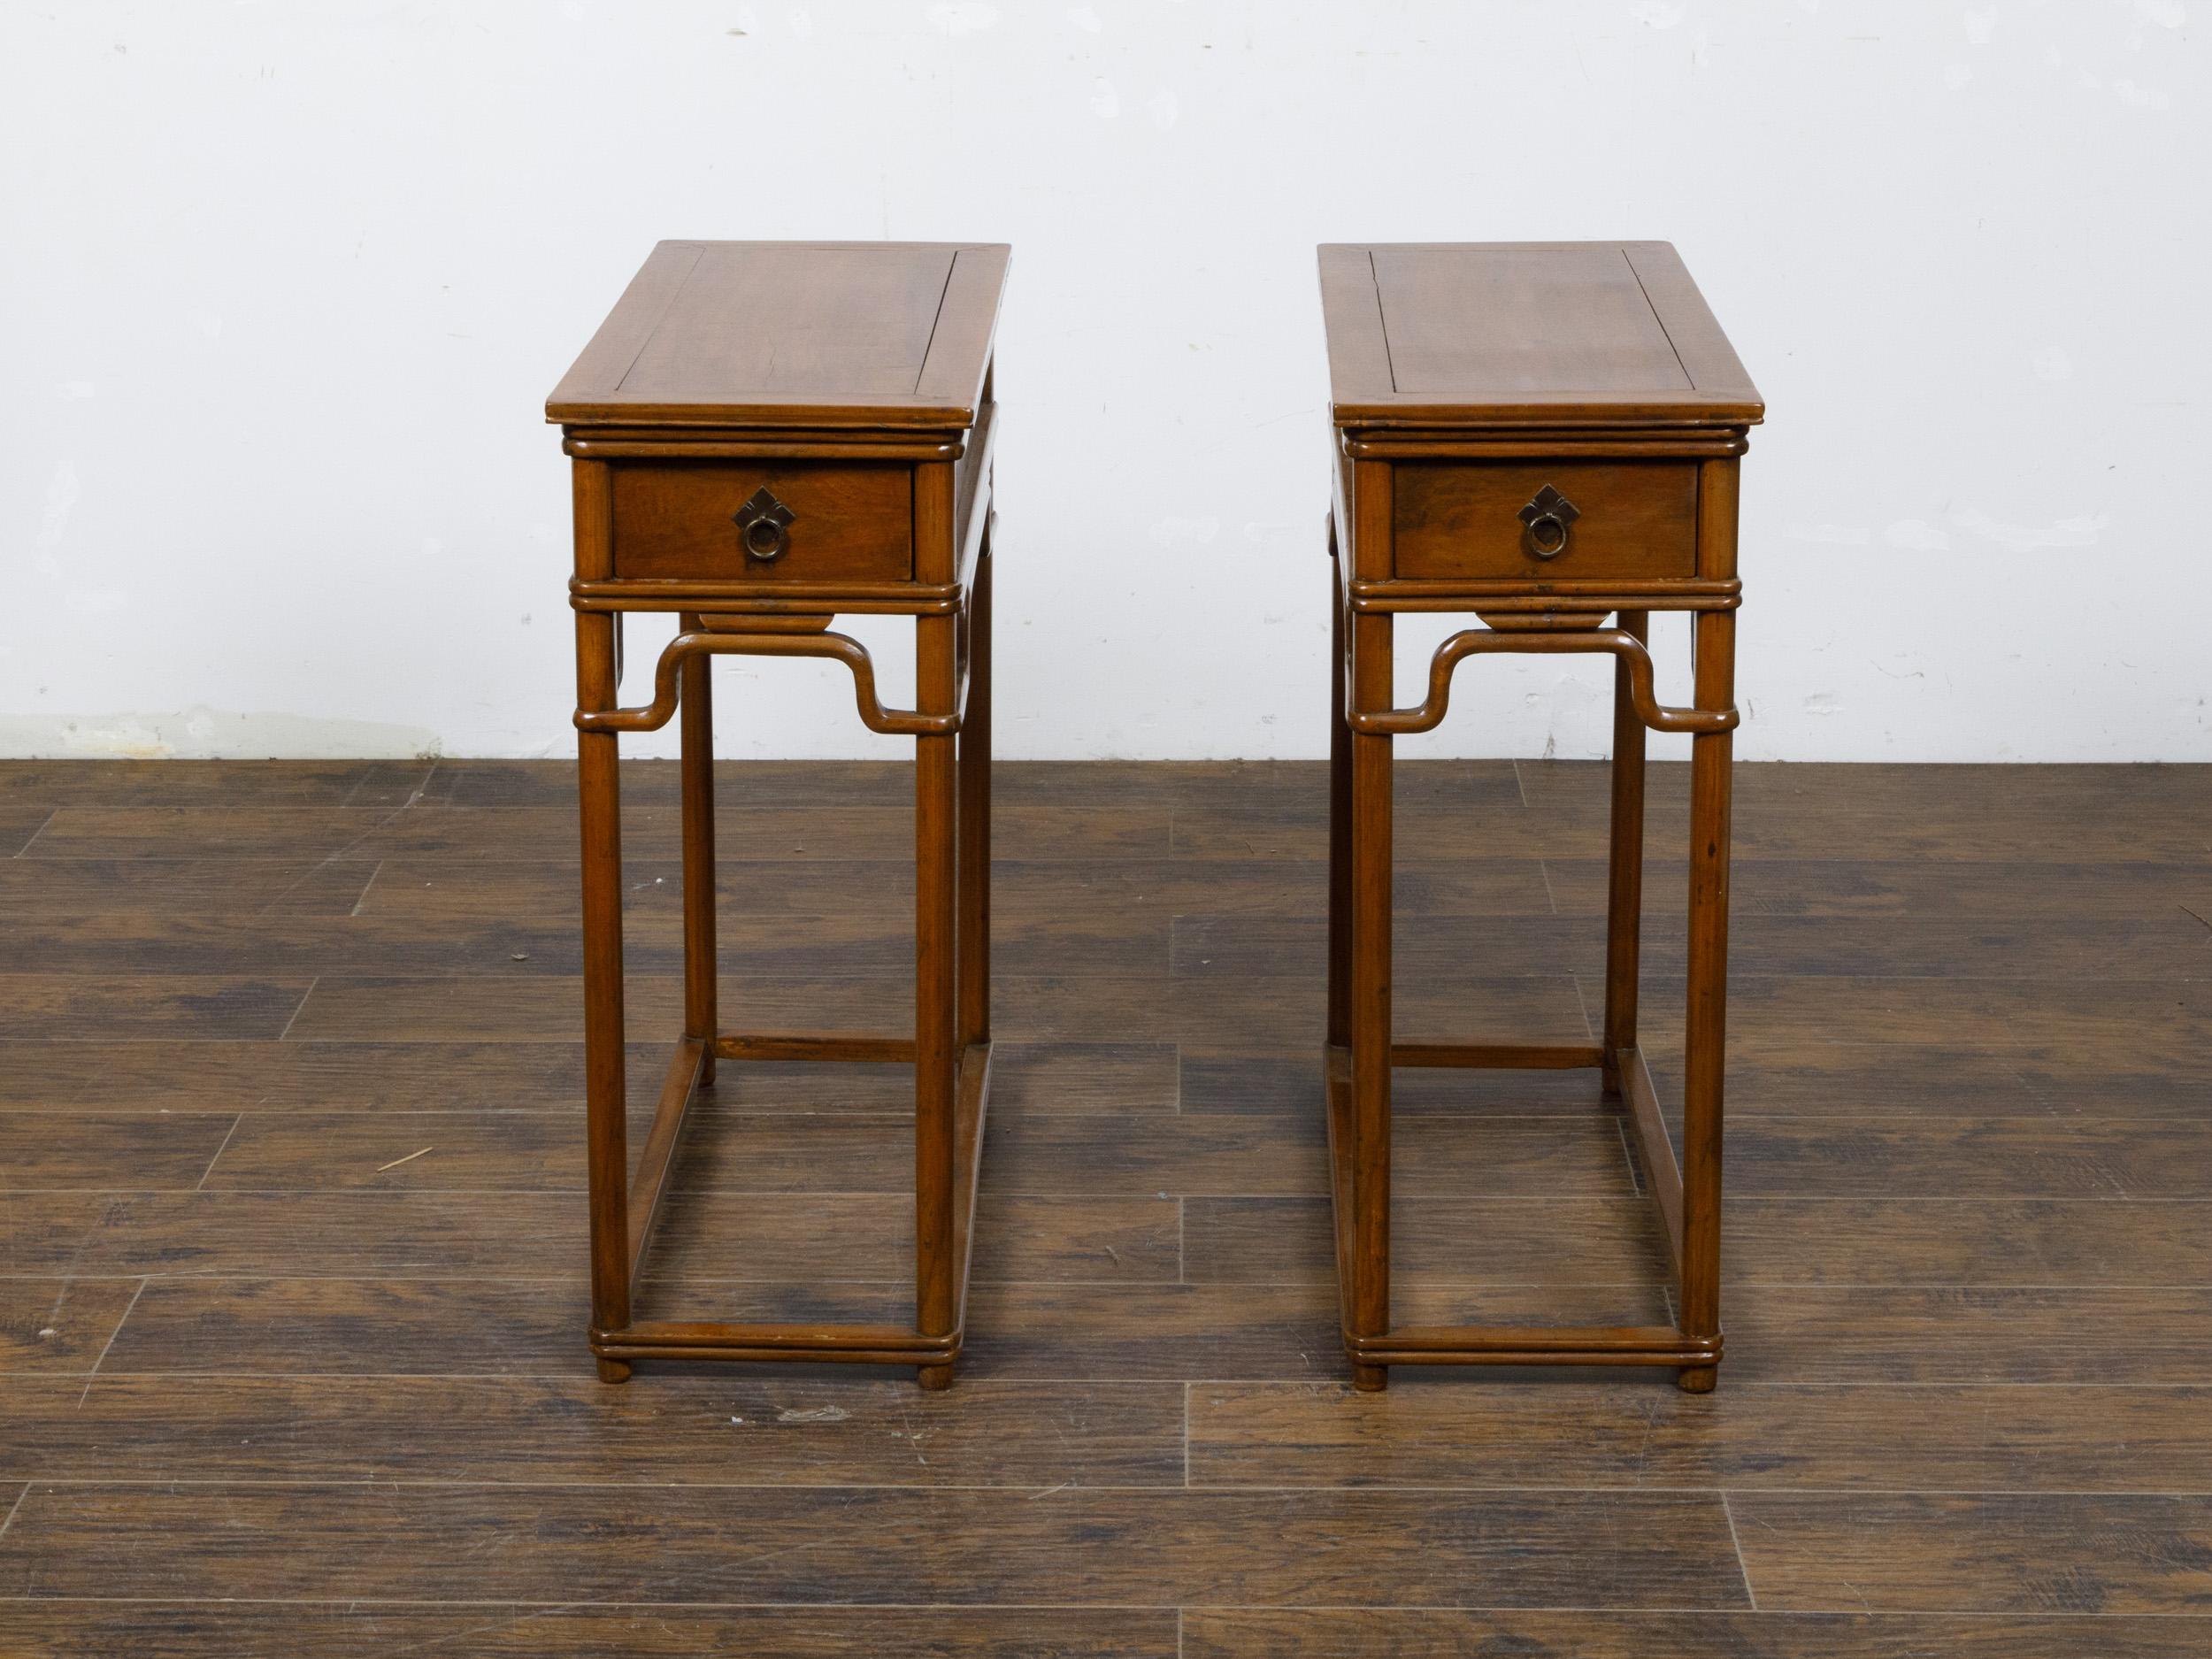 Pair of Teak 19th Century Console Tables with Drawers and Humpback Stretchers For Sale 8